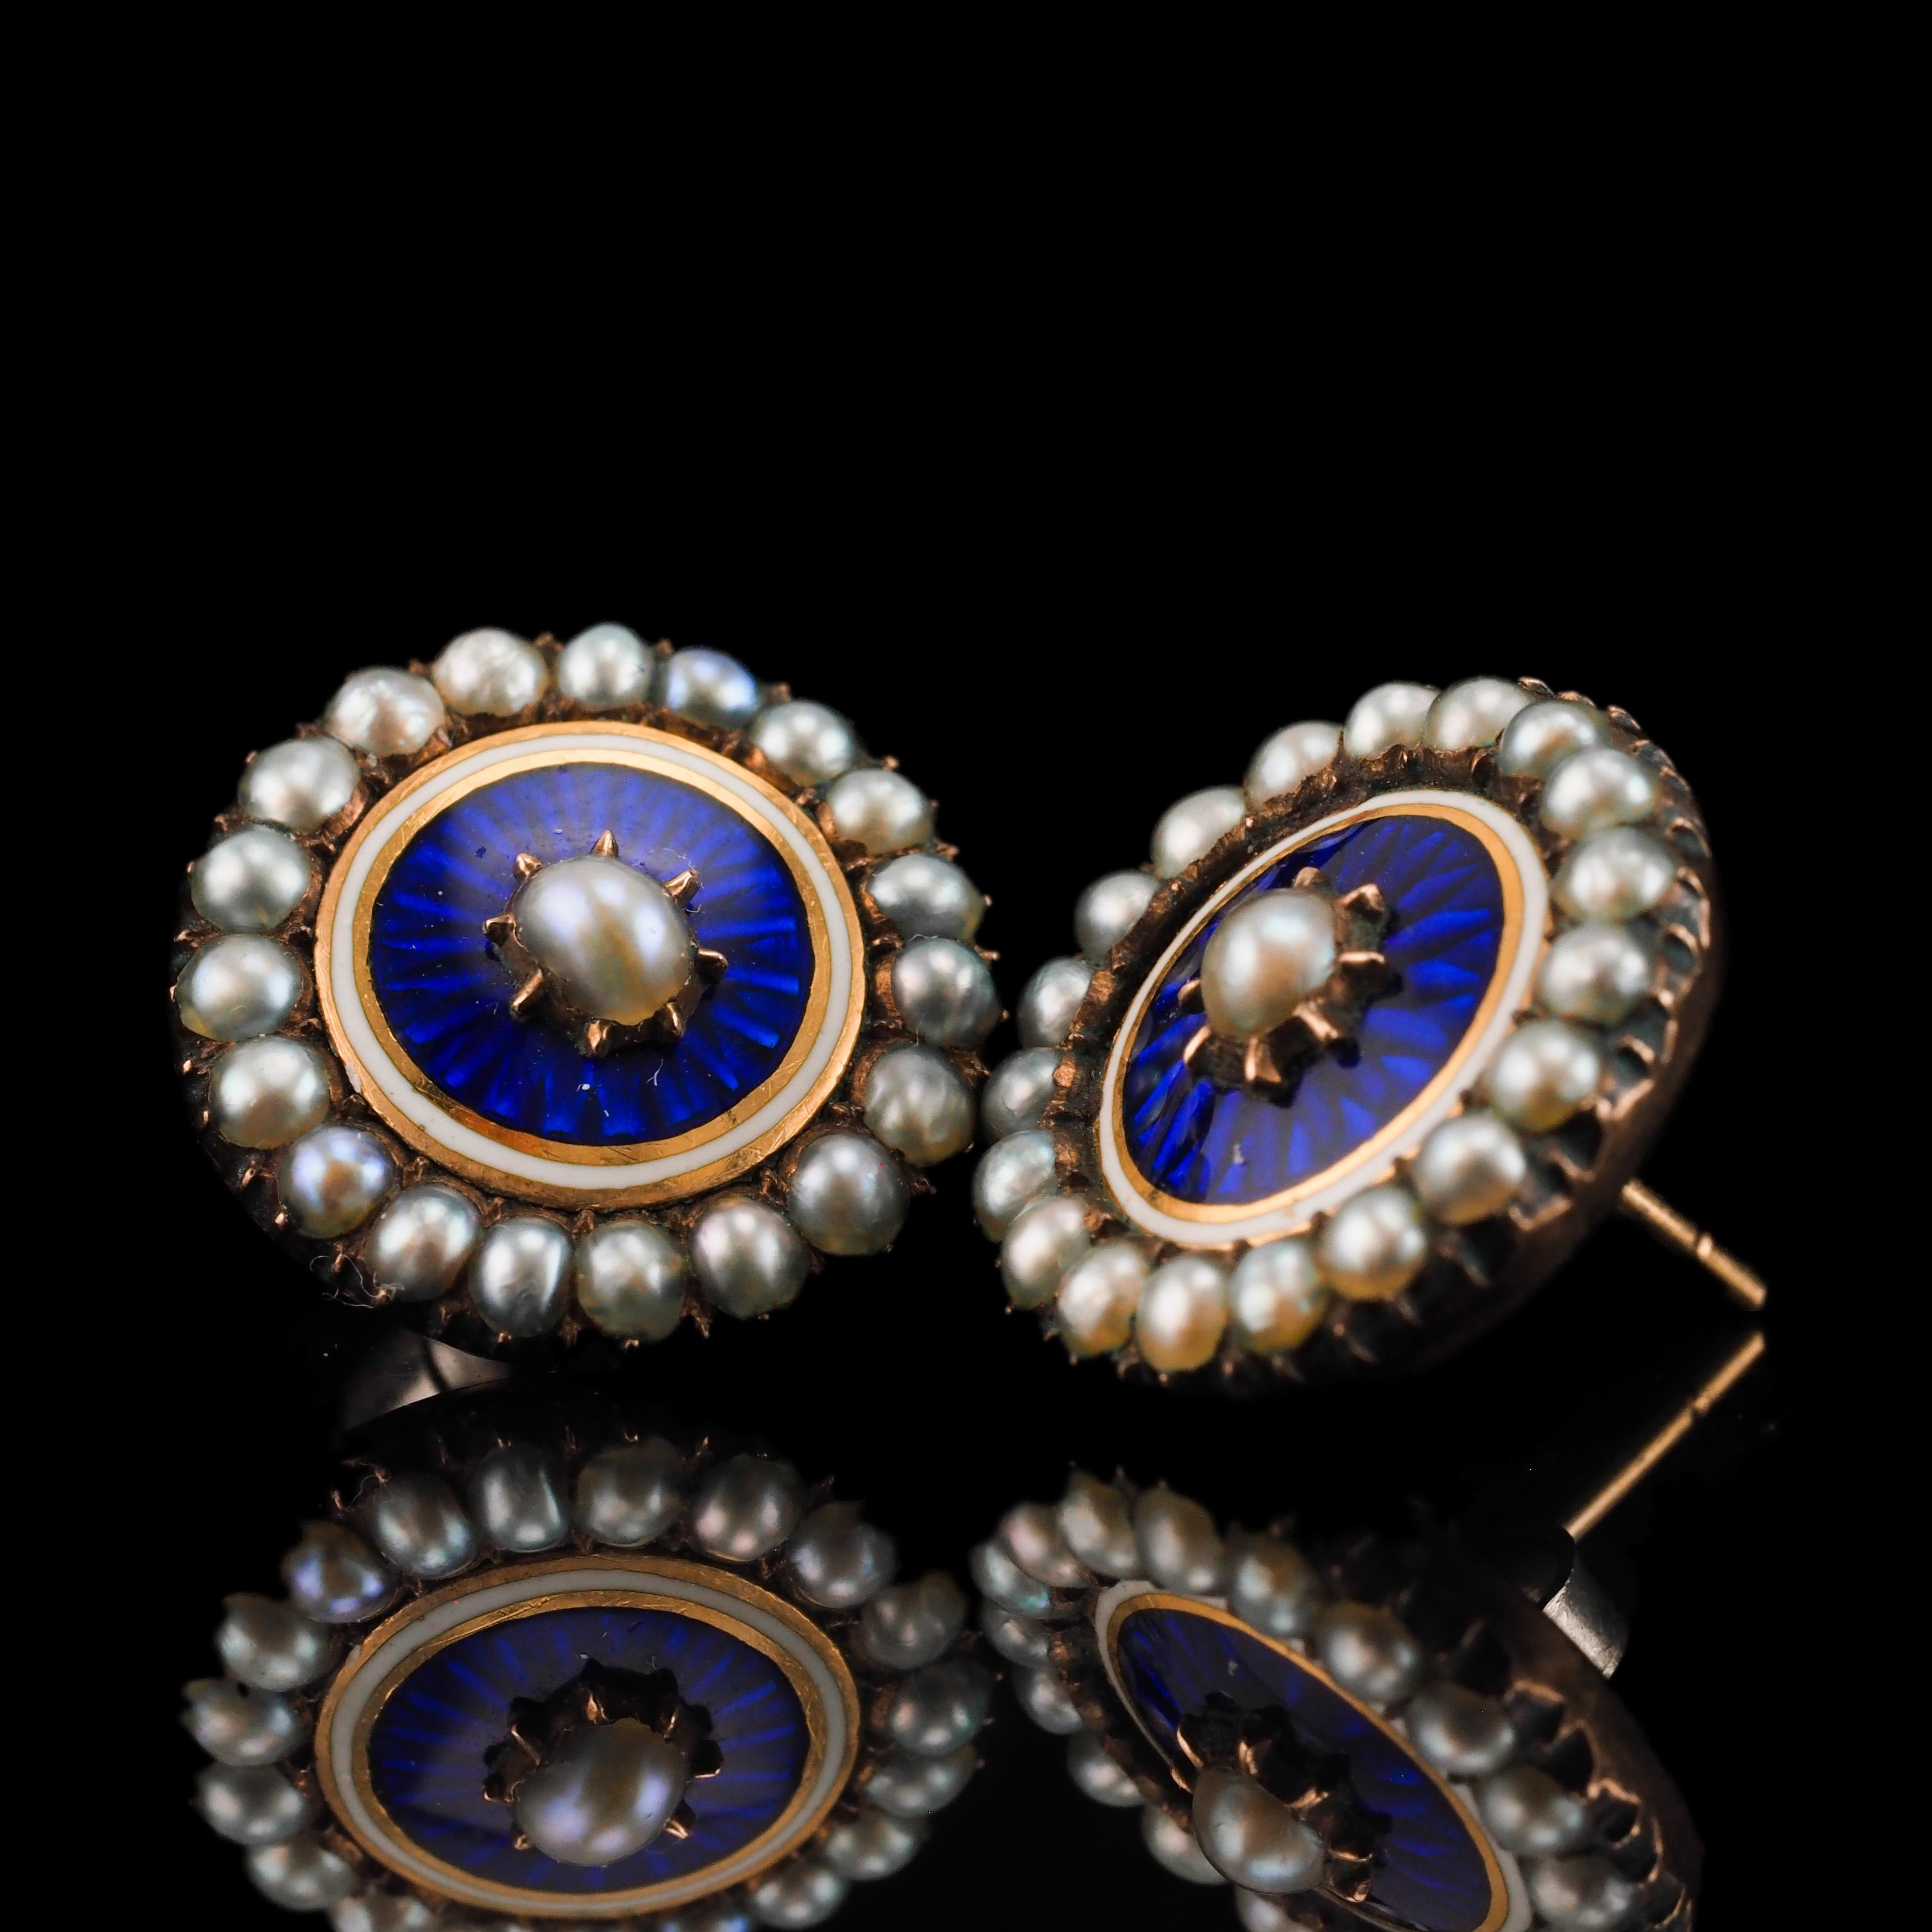 Cabochon Antique Georgian Gold Earrings with Blue Enamel Guilloche Pearl Cluster c.1800 For Sale